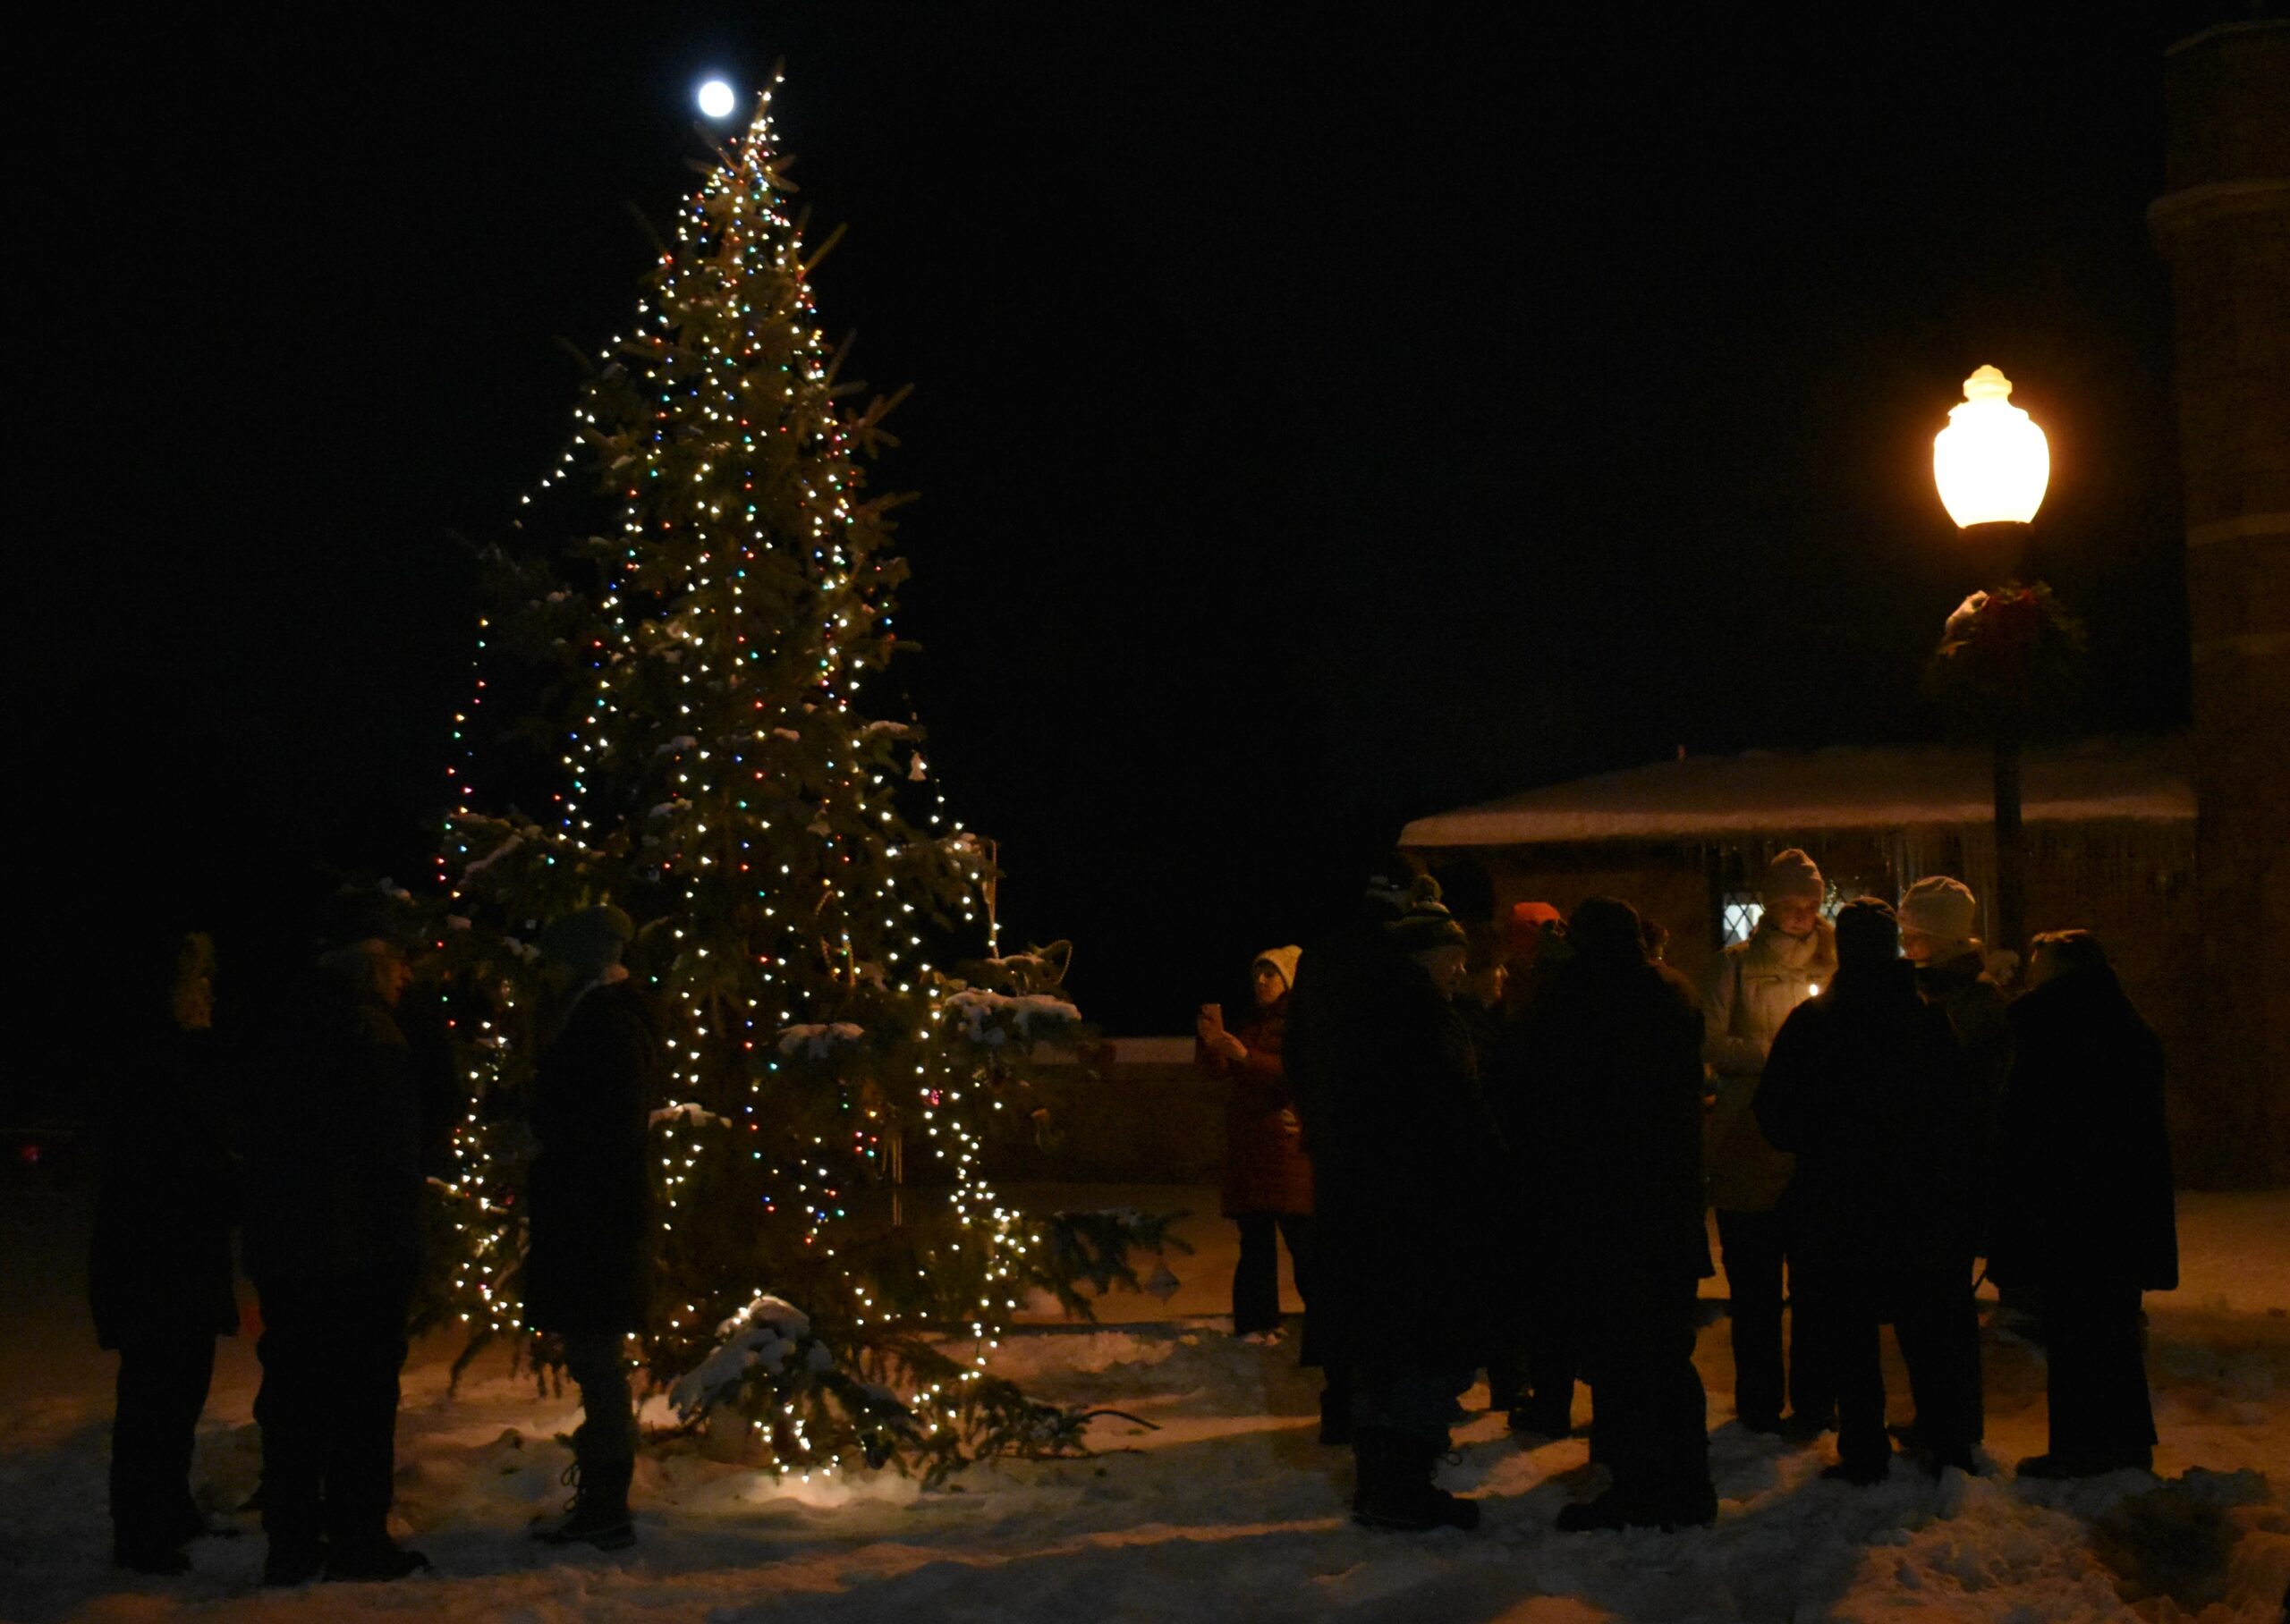 Remembrance tree at Pine Grove Cemetery in Wausau